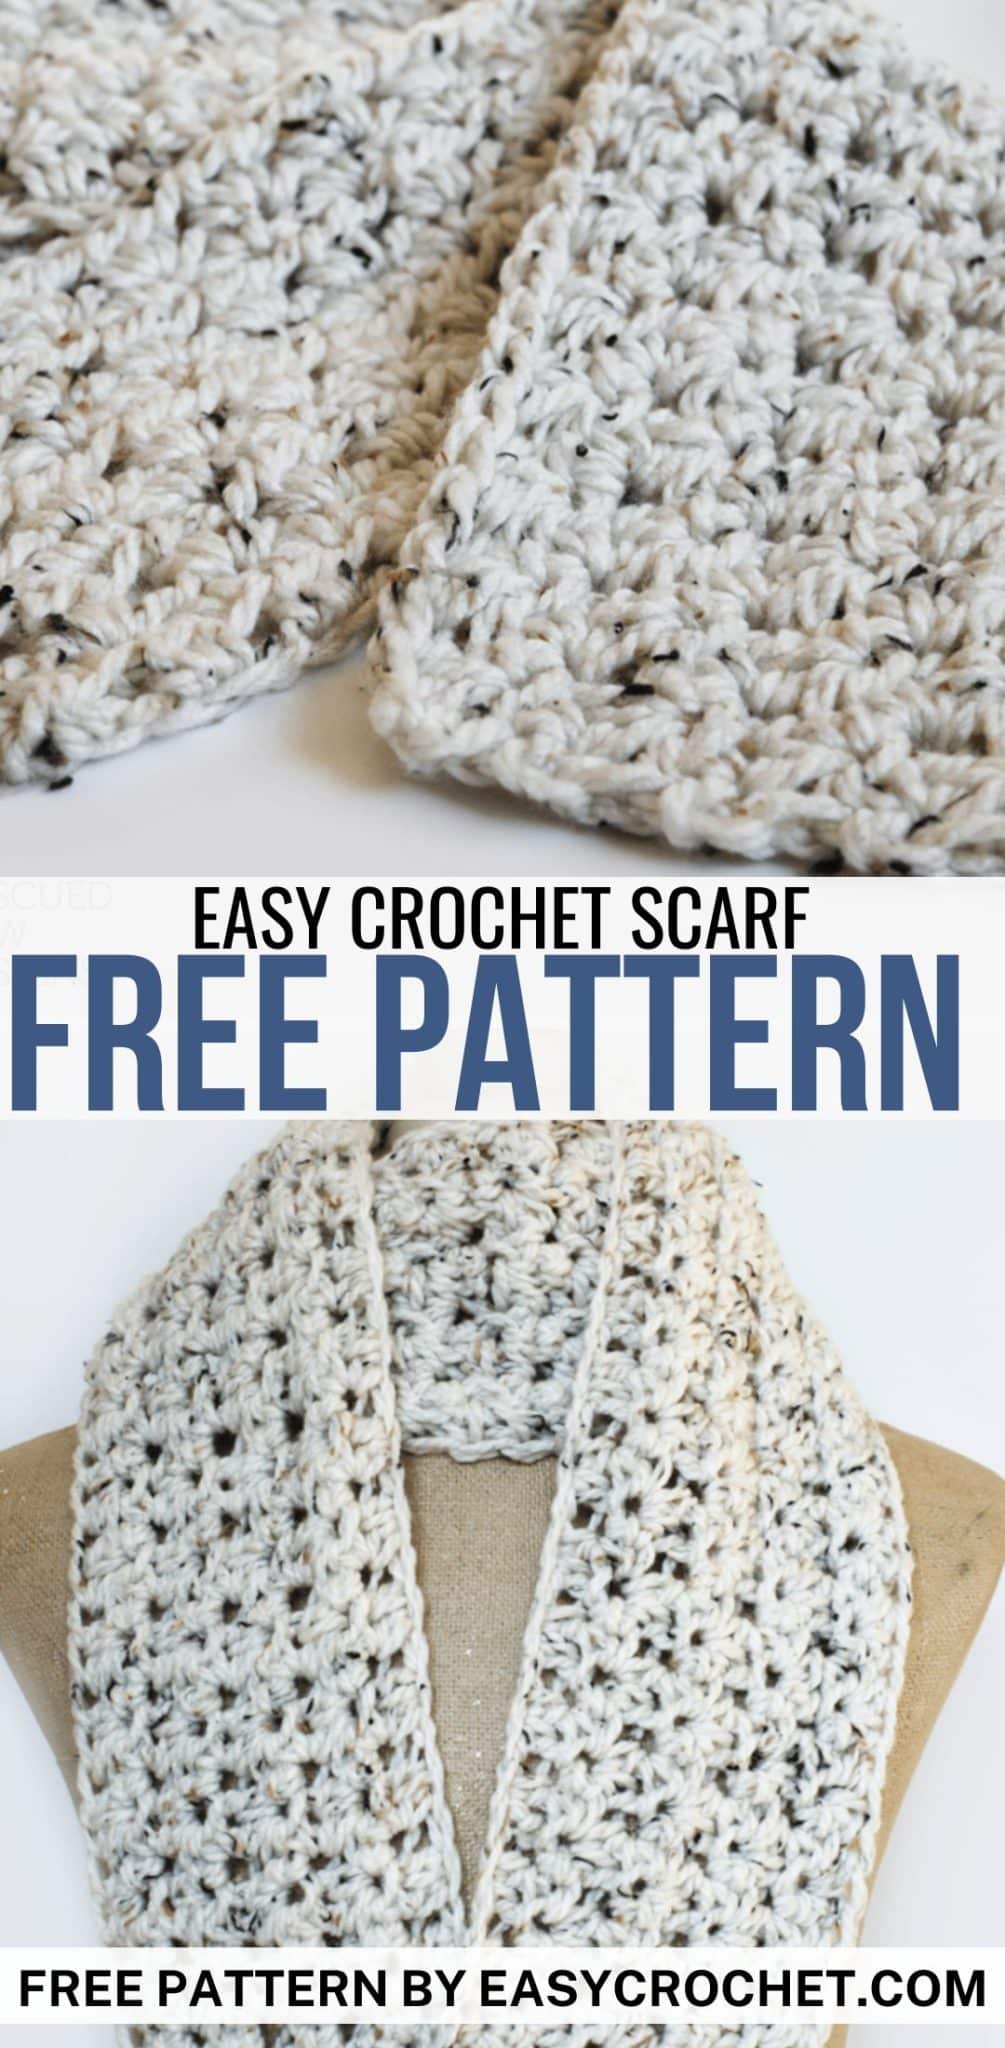 Fall Must-Haves for Babies, Free Crochet Patterns - Your Crochet